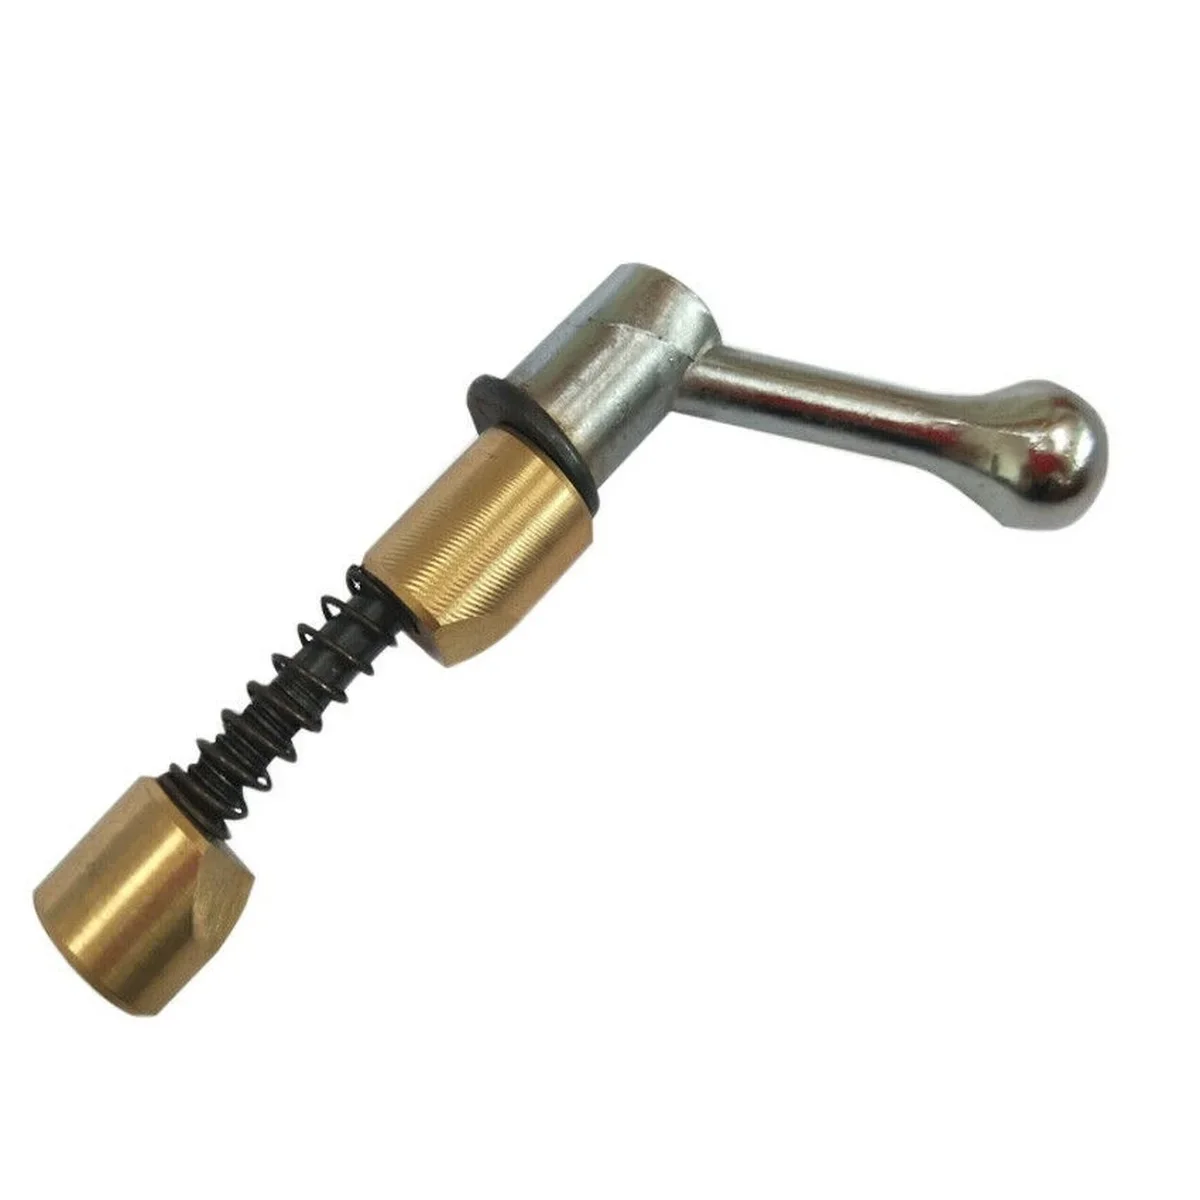 

CNC Mill Part Milling Machine Part Table Lock Bolt Handle M8 Thread Spindle Lock Handle for Bridgeport Mill Tool